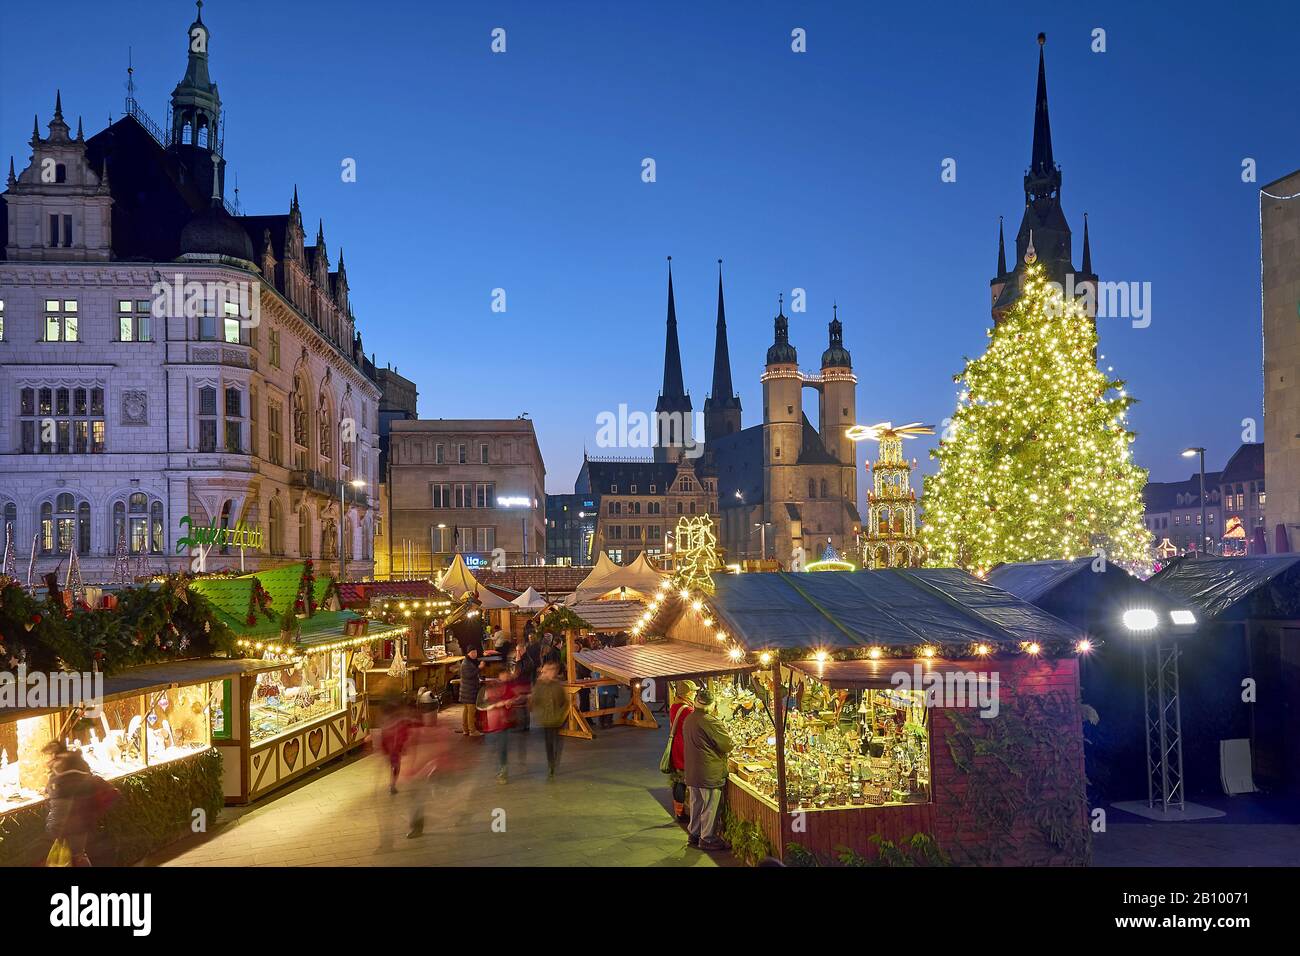 Christmas market with Marktkiche St. Marien and Roter Turm in Halle / Saale, Saxony-Anhalt, Germany Stock Photo